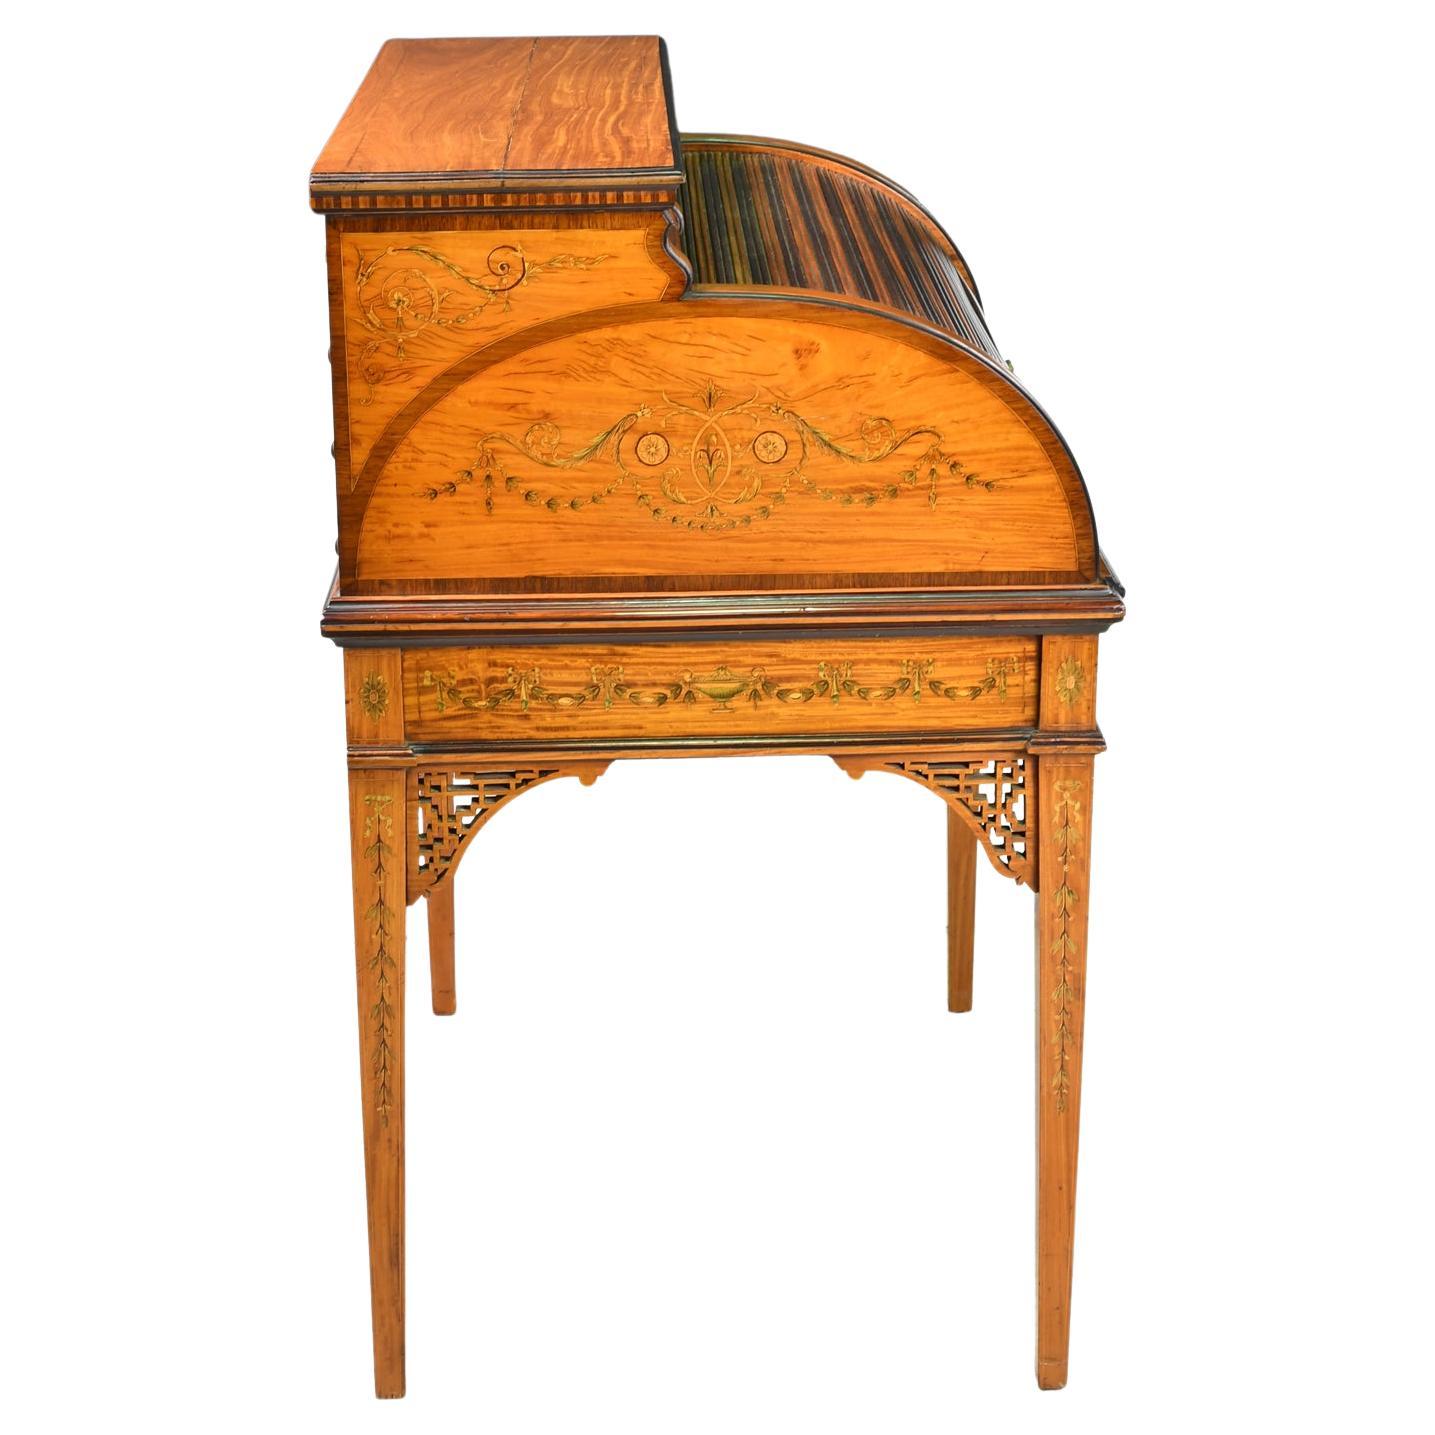 American Gilded Age Hepplewhite-Style Writing Desk in Satinwood w/ Marquetry For Sale 3